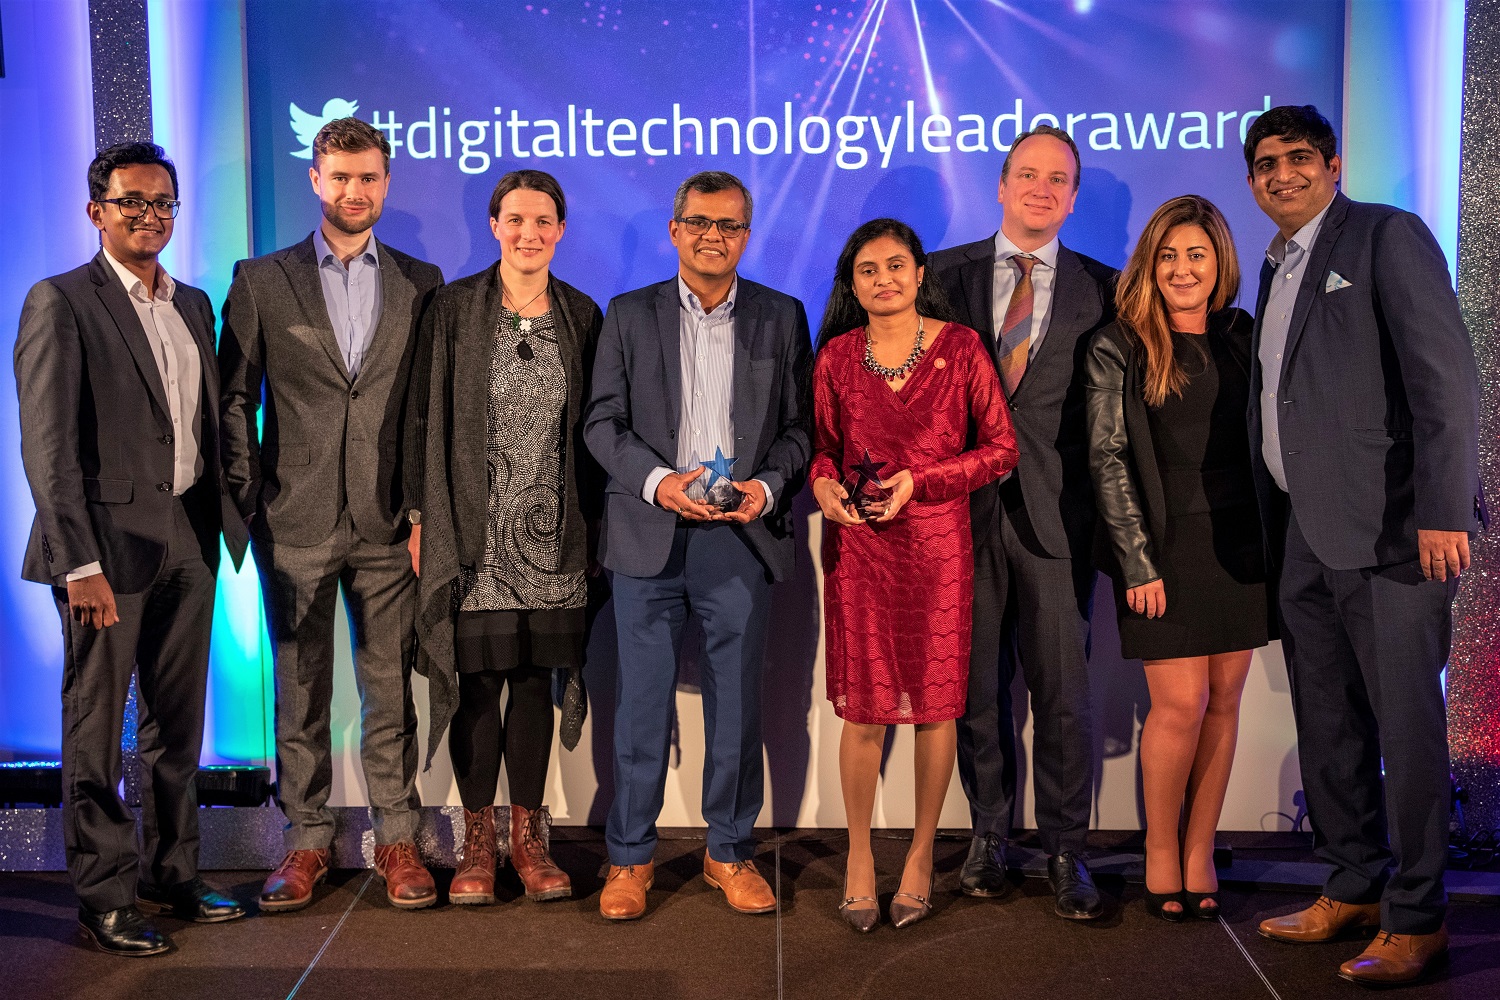 UST Recognized as Best Place to Work at Computing UK’s Digital Technology Leaders Awards 2021